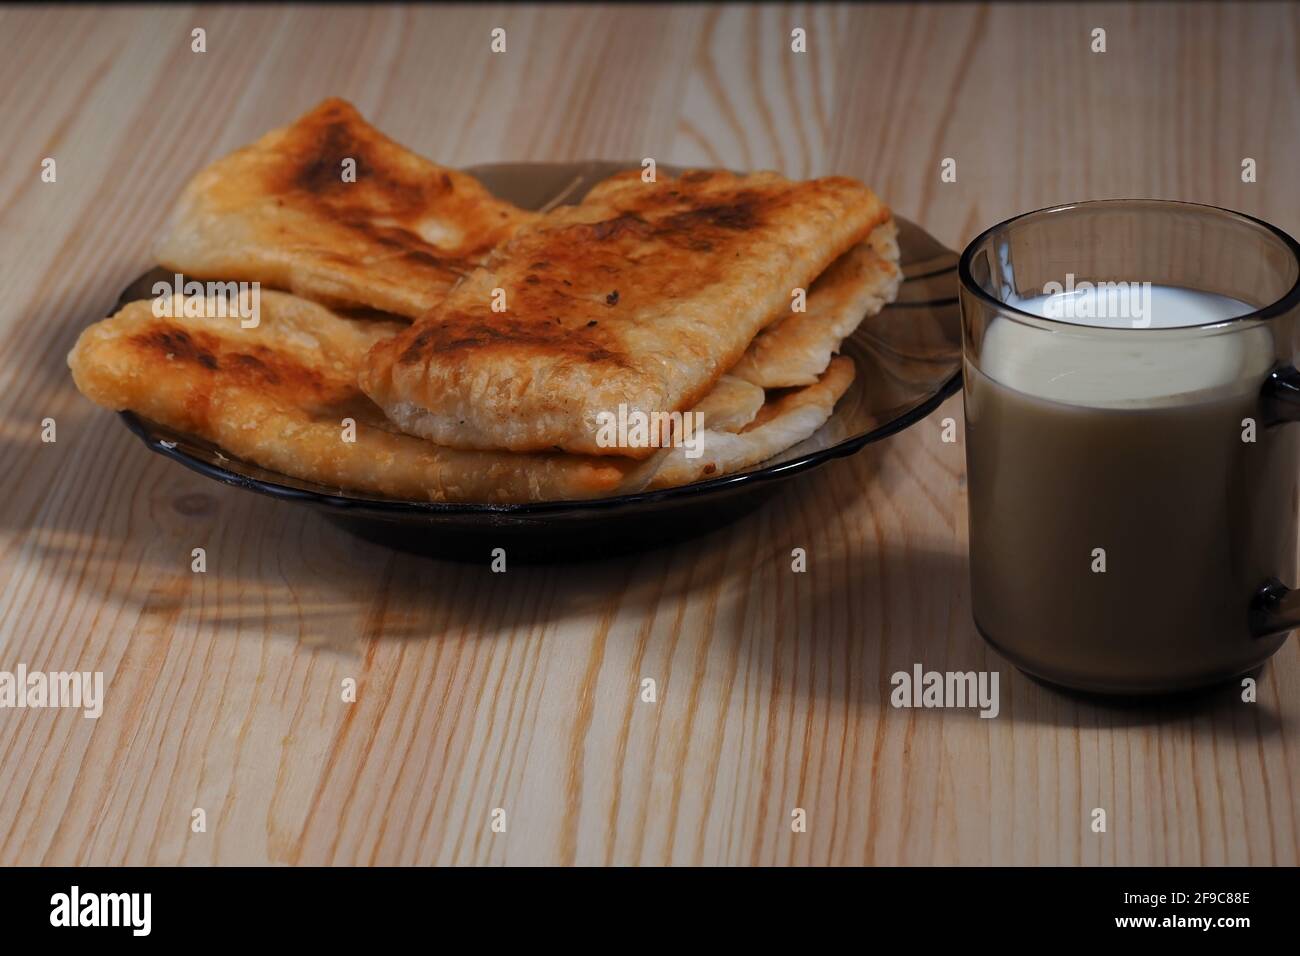 Homemade food. Pies and a glass of milk on the table. Stock Photo